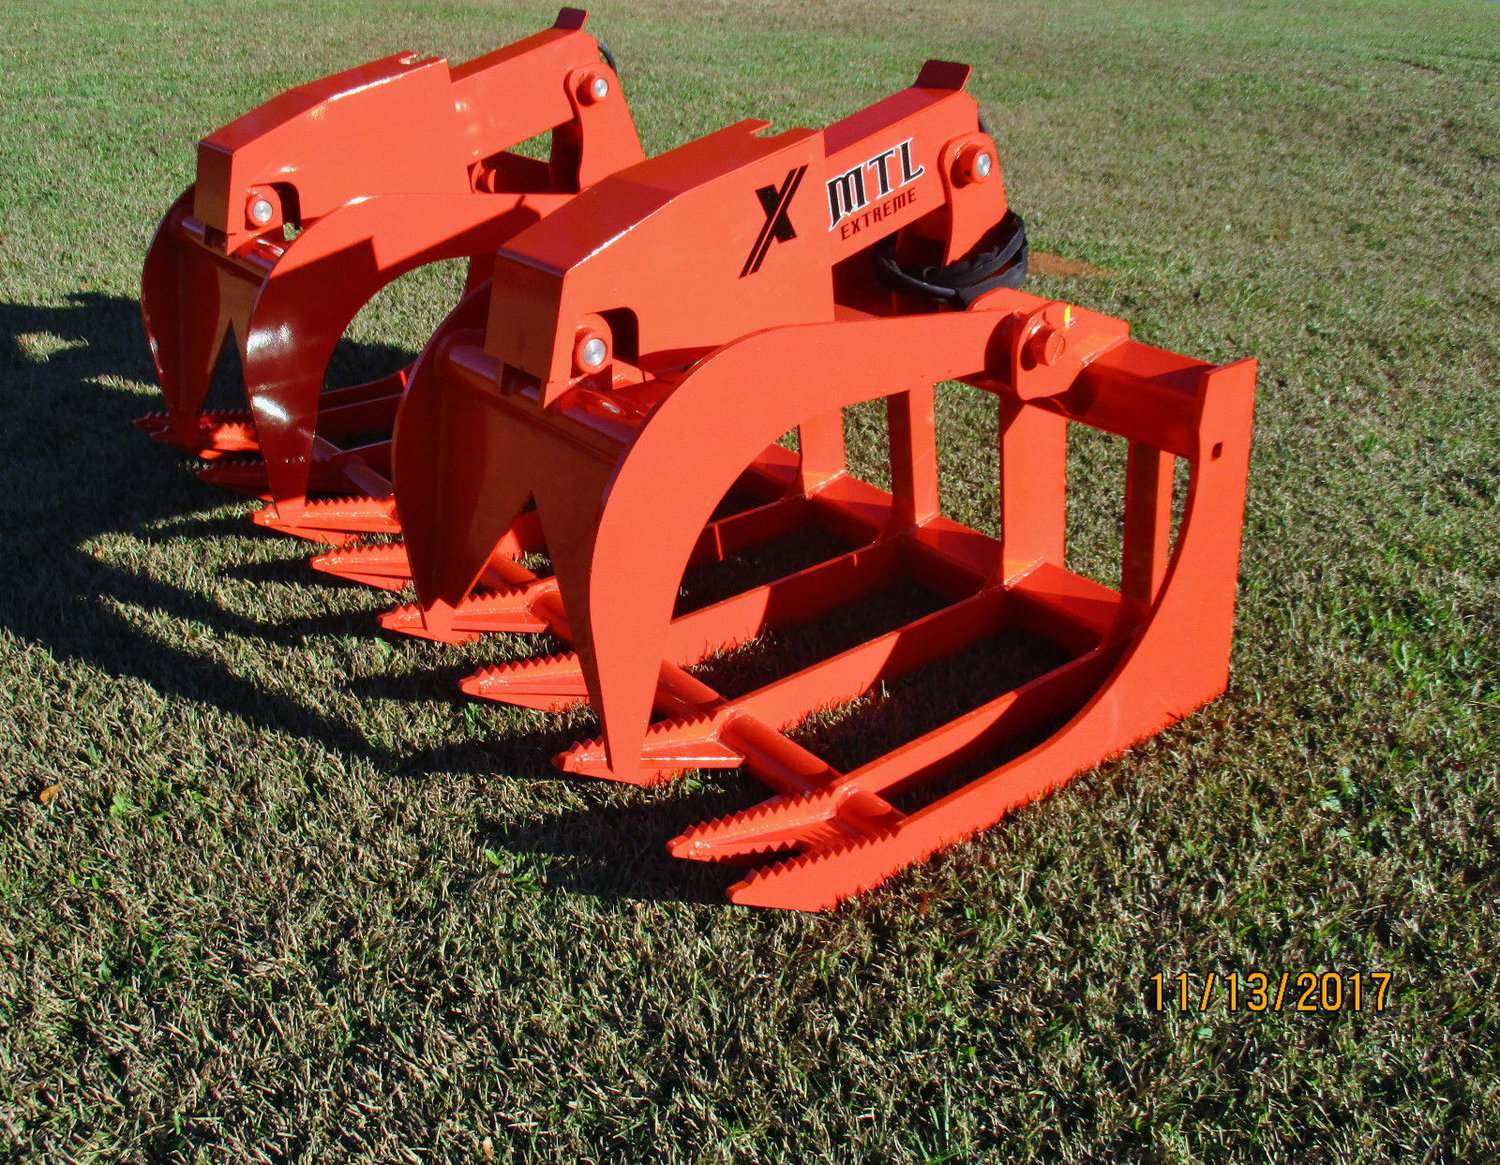 Getting The Kubota Skid Steer Attachments To Work